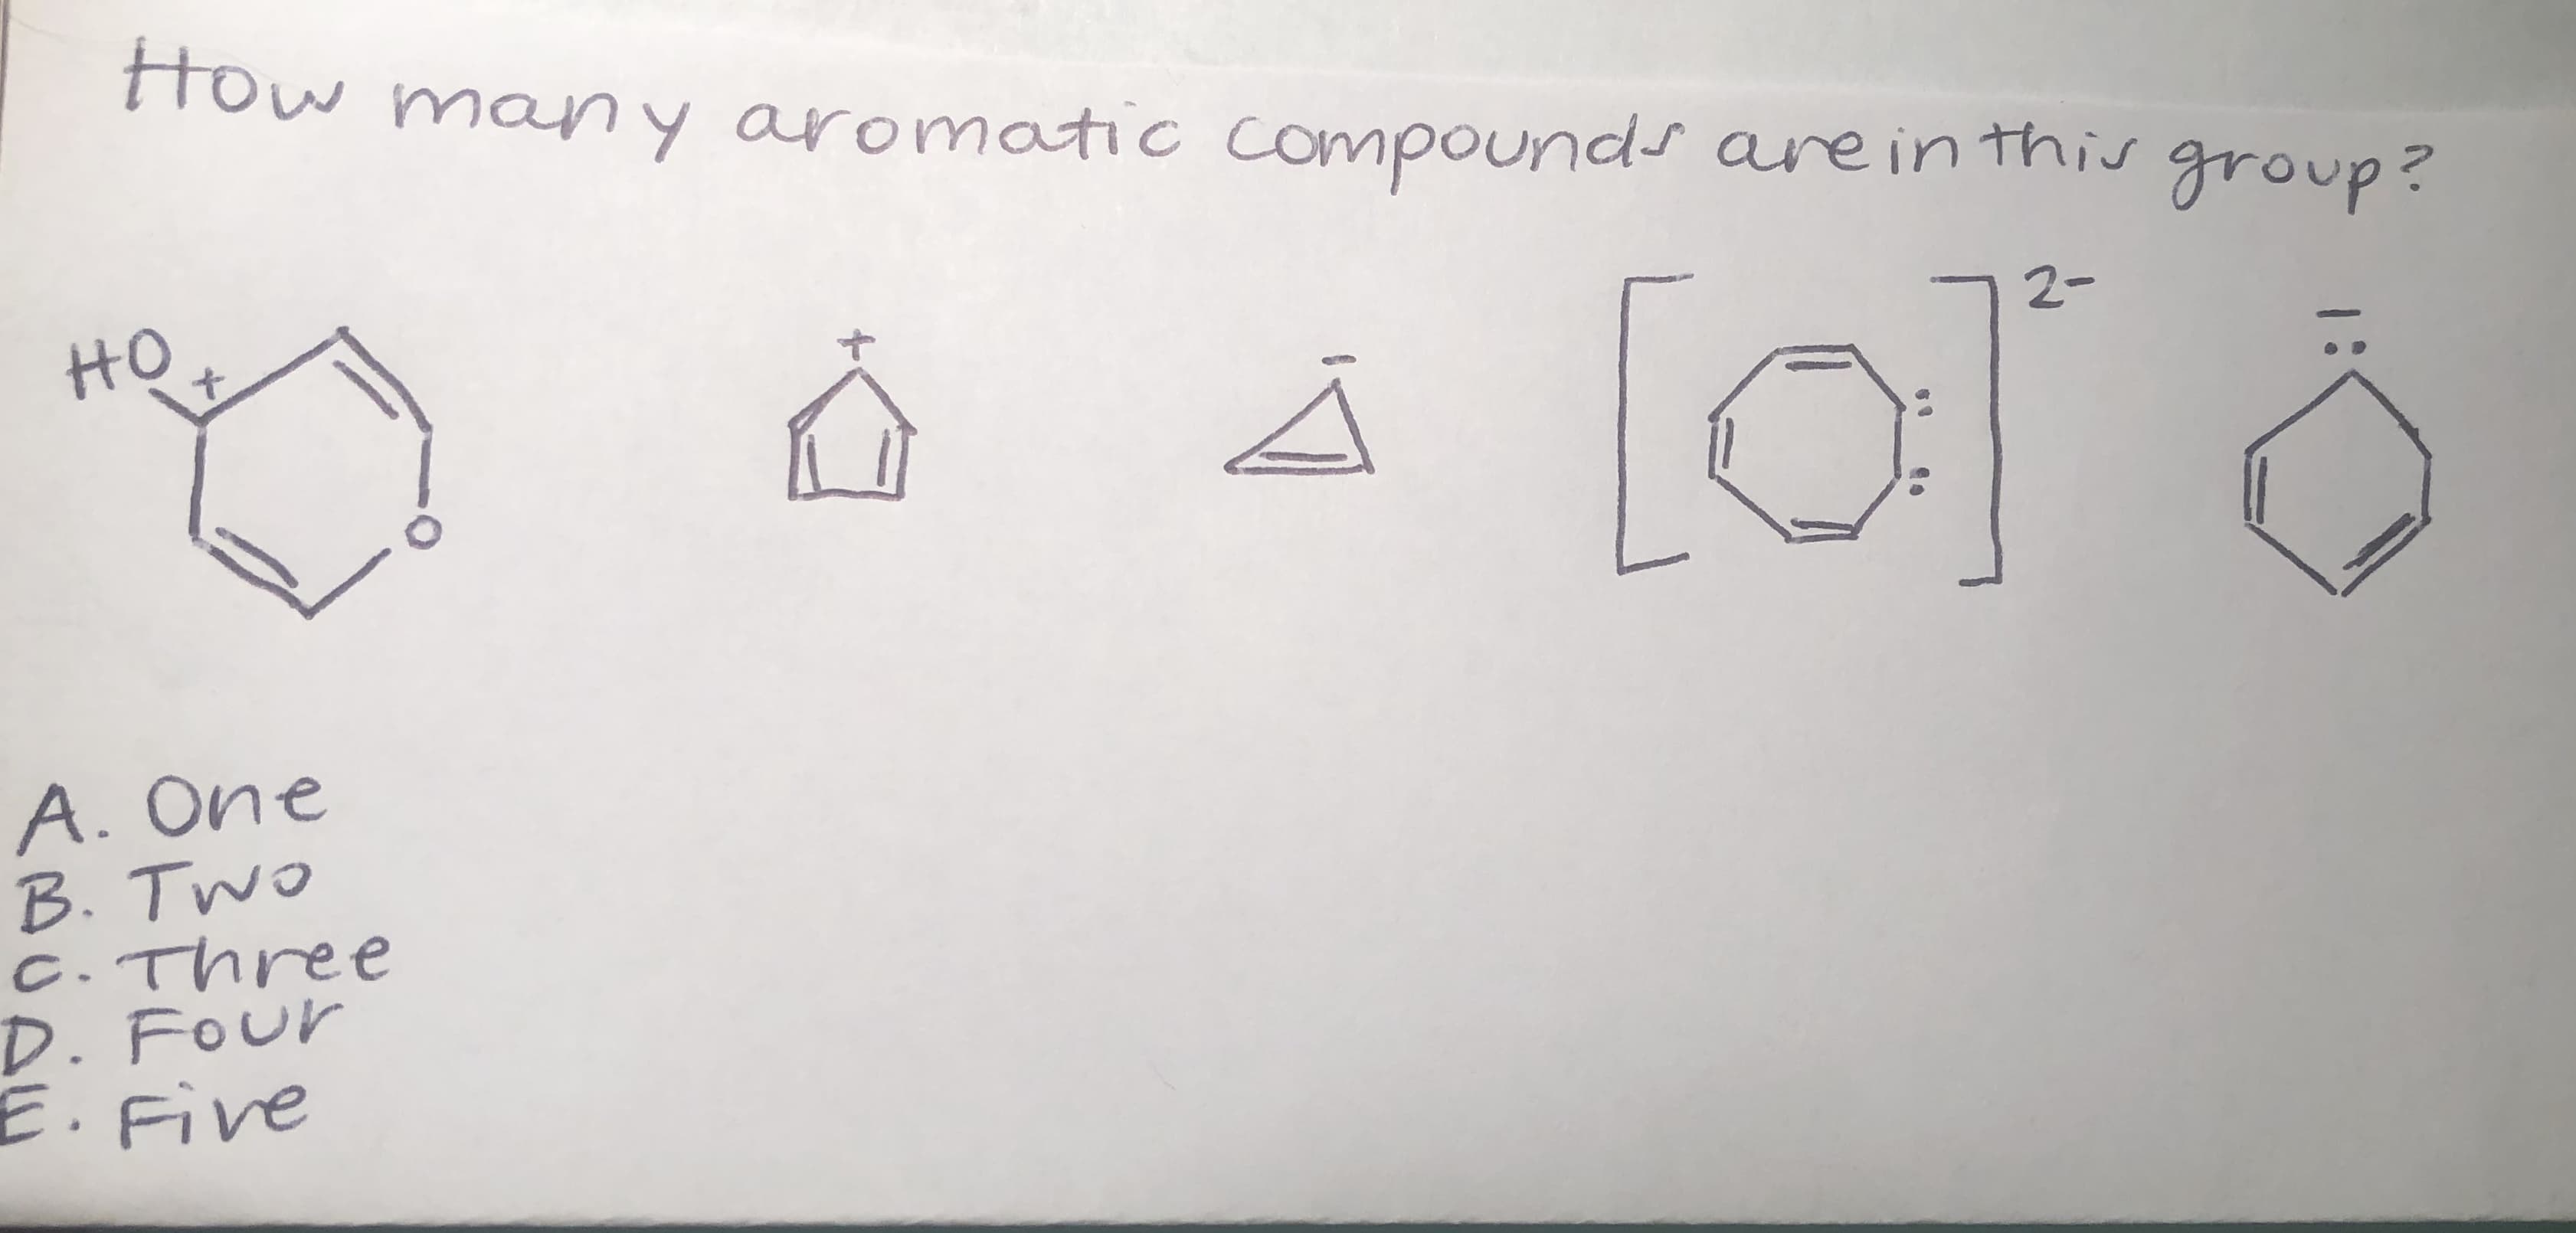 TTow many aromatic compounds are in this
group?
HO
[0]
2-
A. One
B. TWO
C. Three
D. FOur
E.Five
